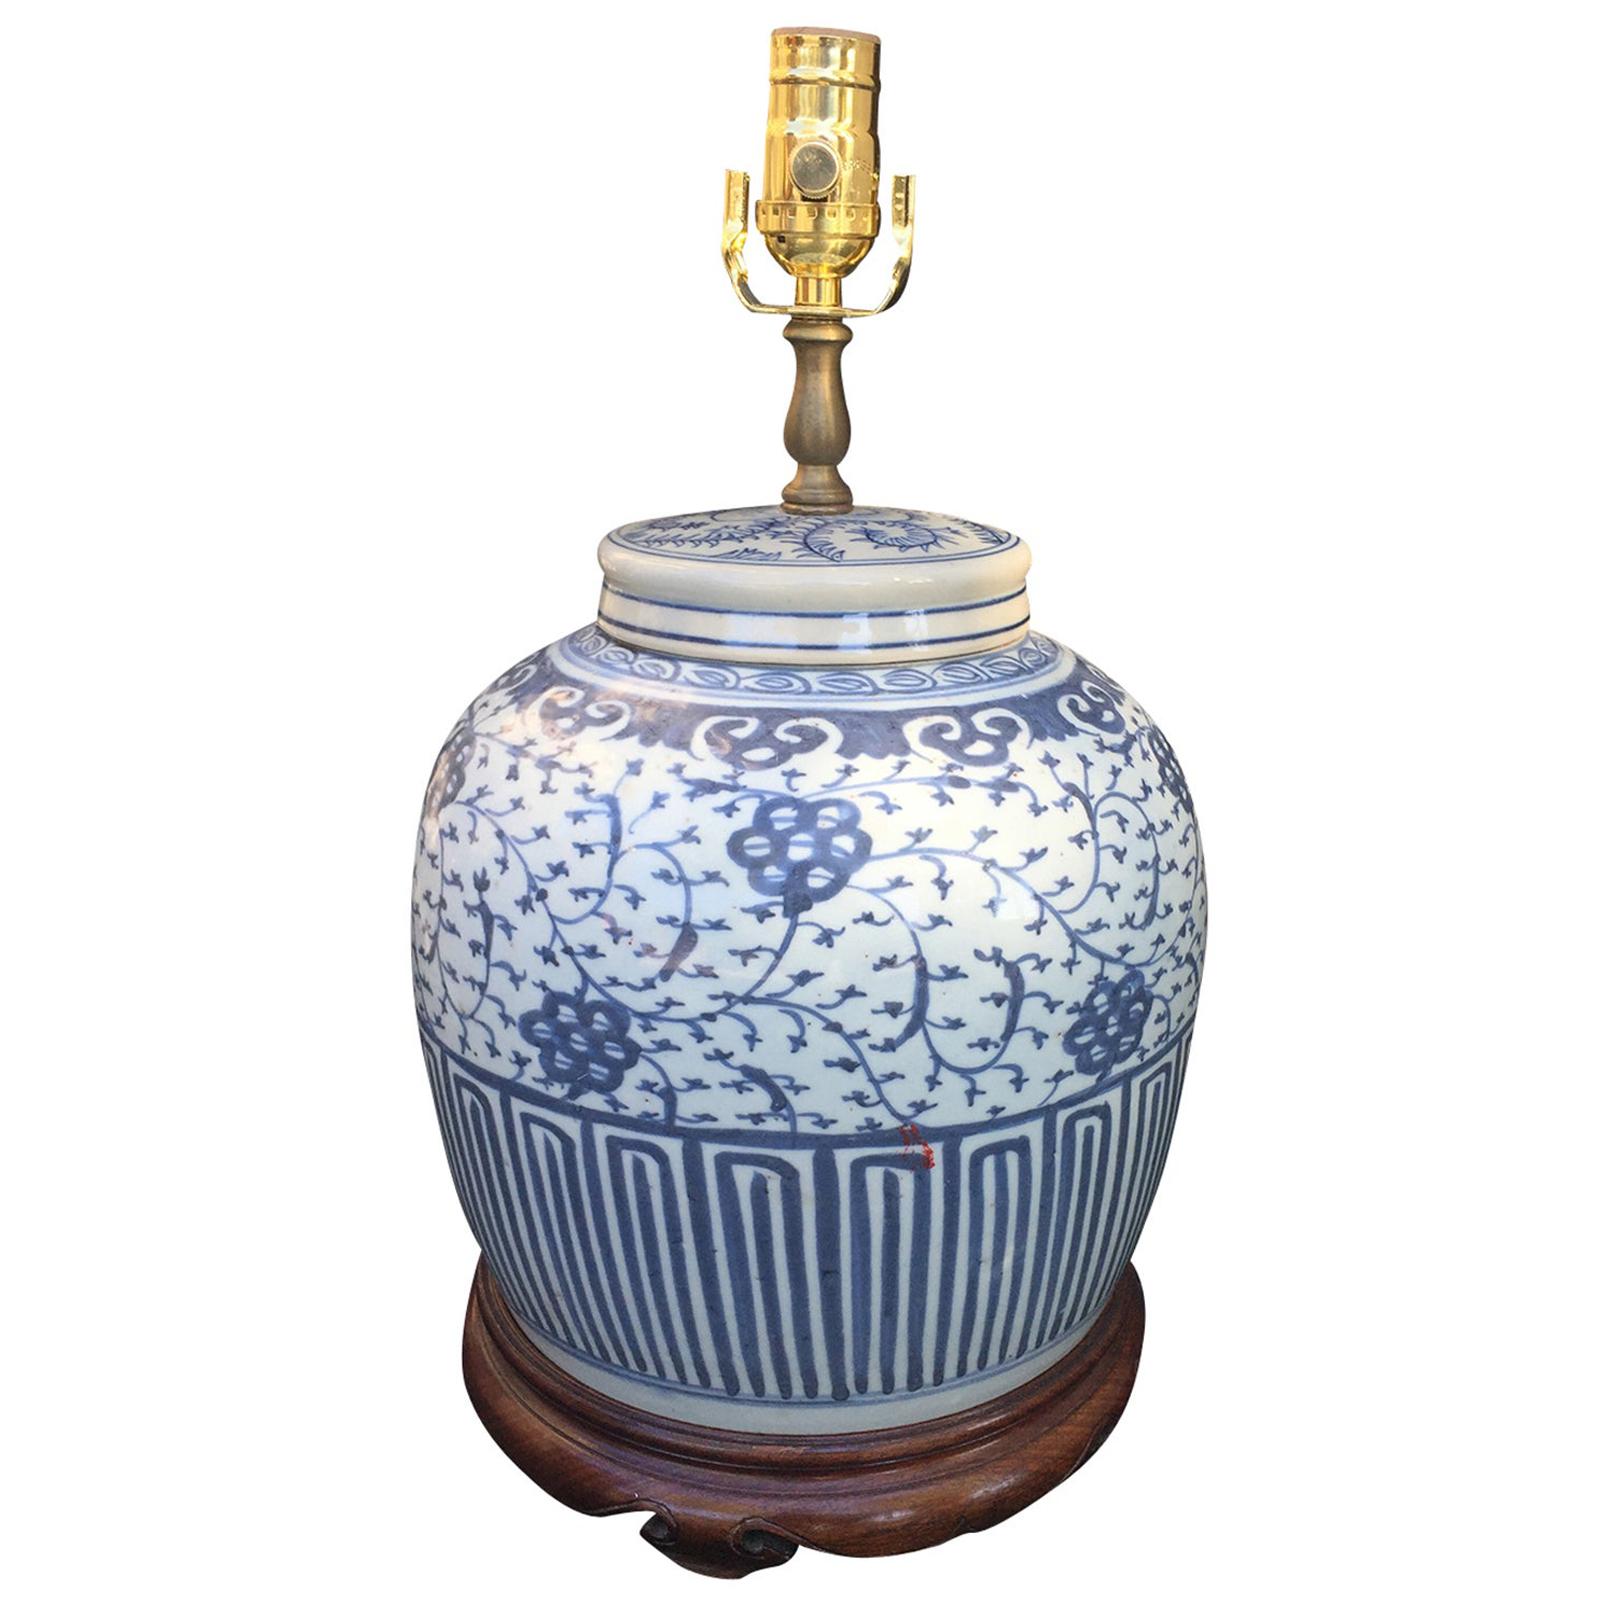 19th-20th Century Chinese Blue and White Covered Porcelain Jar as Lamp For Sale